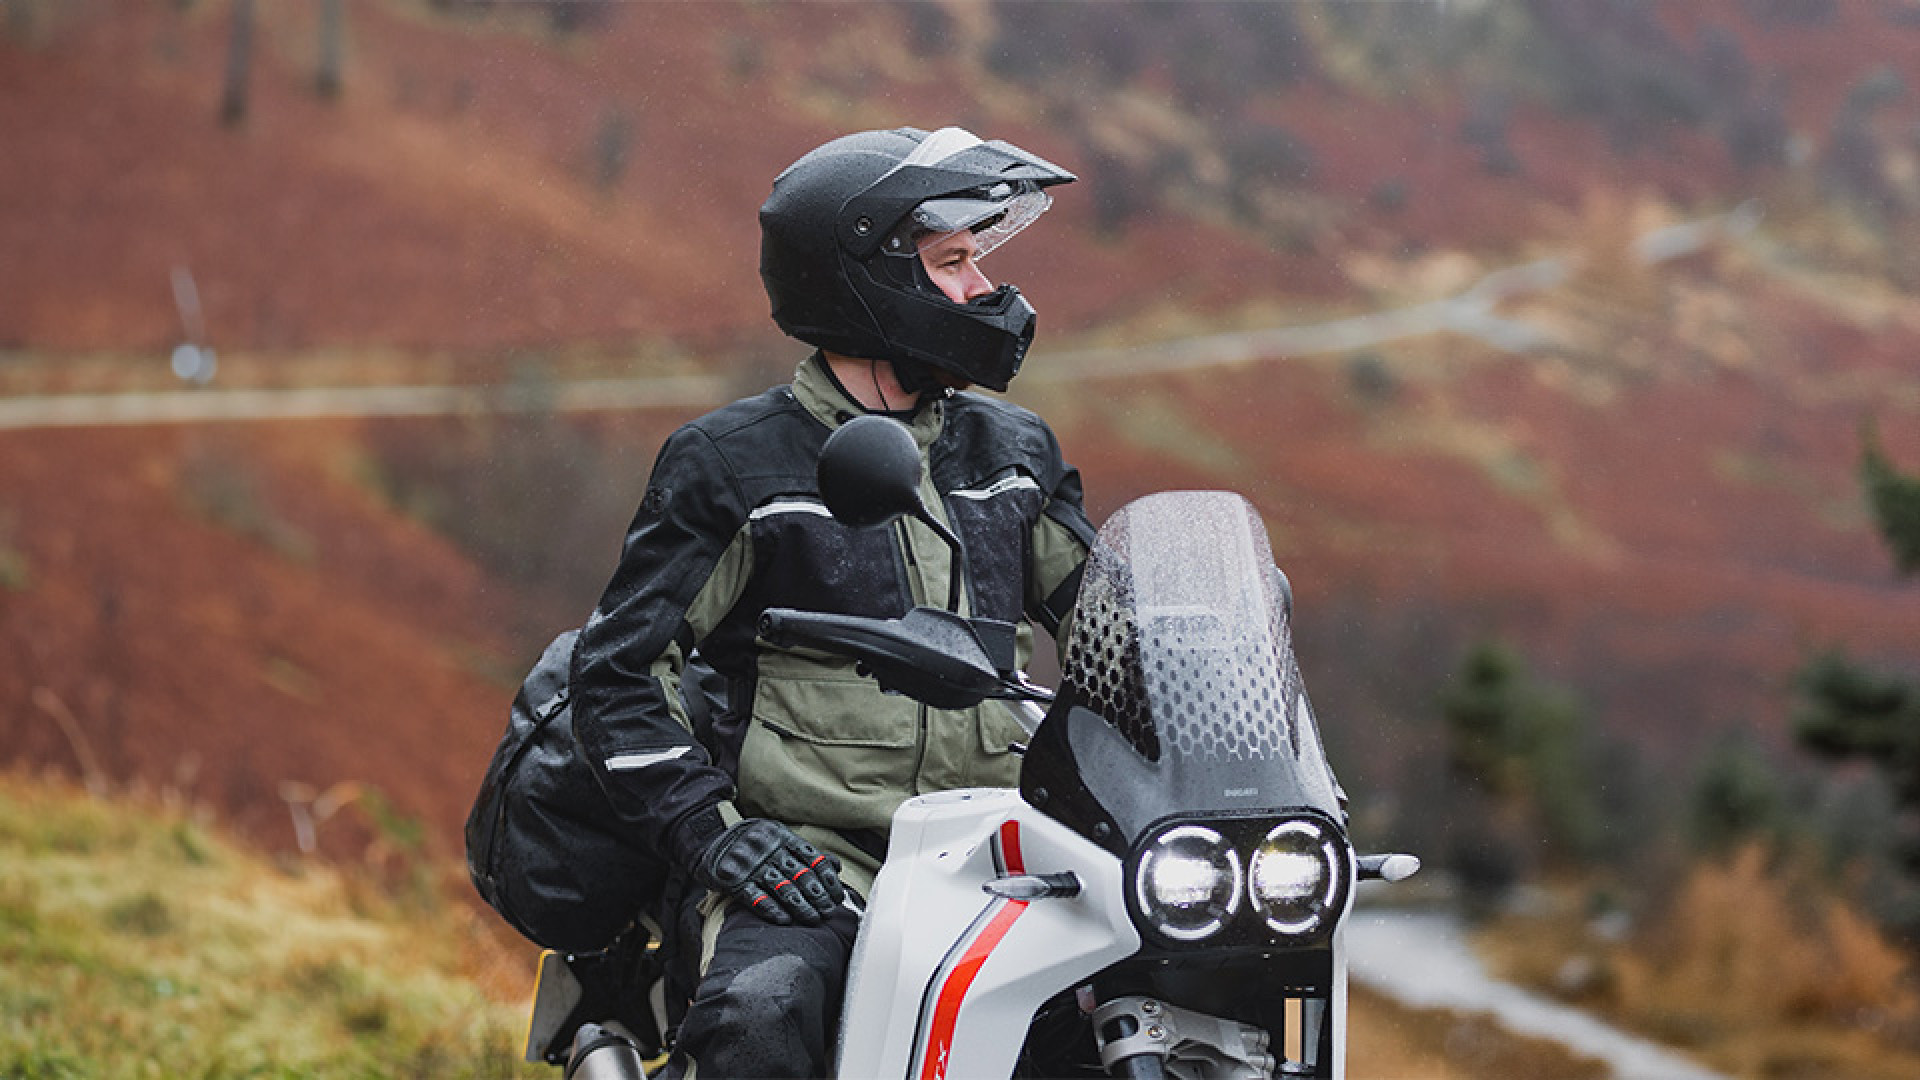 https://www.raceleathers.co.uk/image/cache/catalog/Blog%20Images/Oxford%20Mondial%202.0%20Jacket%20Product%20Review-1920x1080.jpg